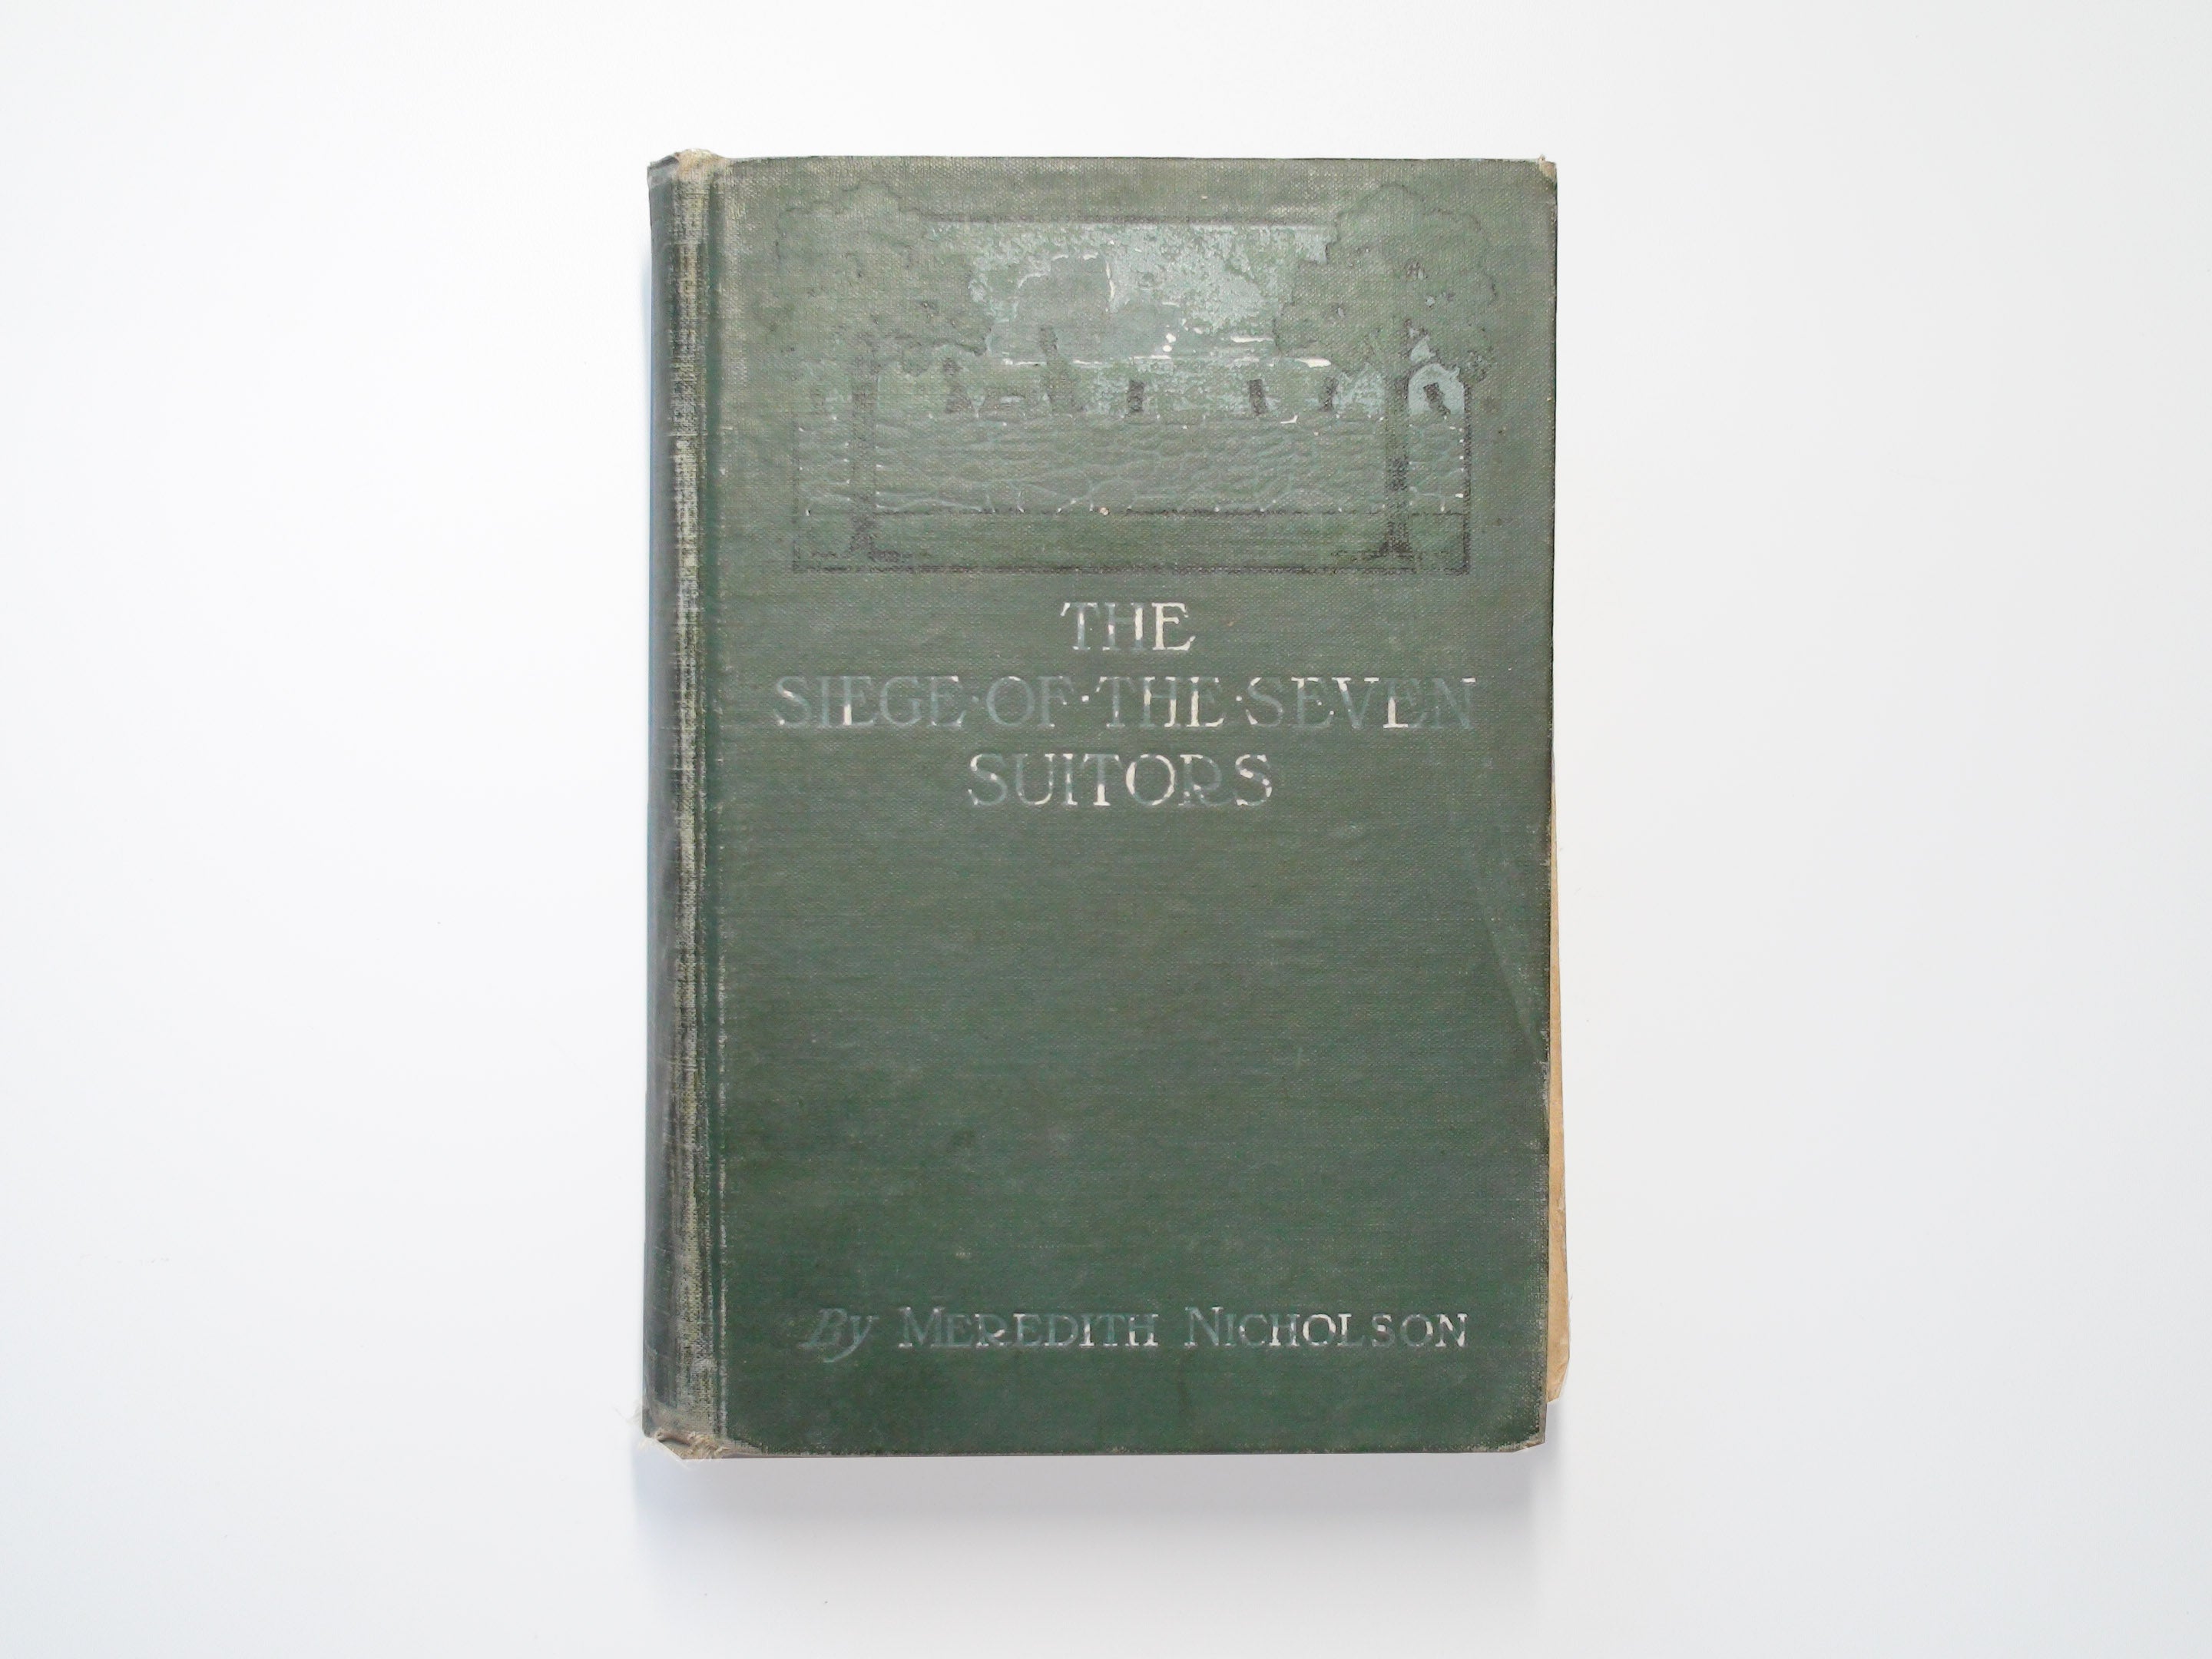 The Siege of the Seven Suitors by Meredith Nicholson, Illustrated, 1910